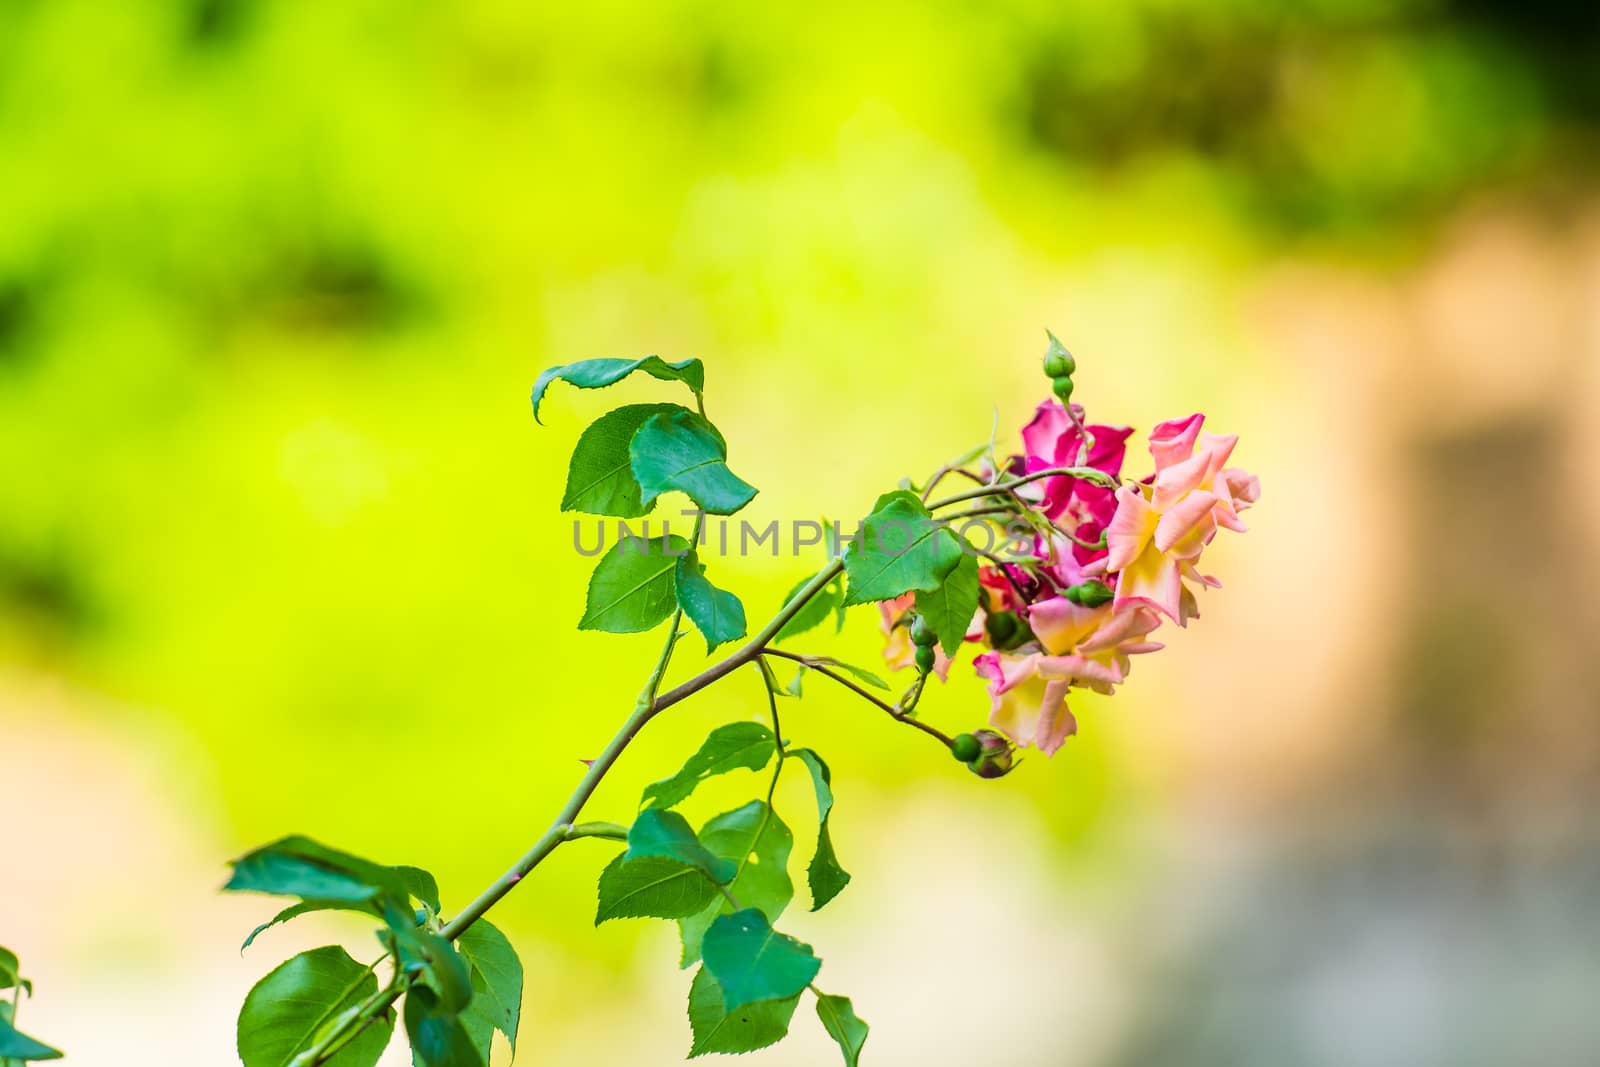 Pink rose flowers with green and yellow background blur UK